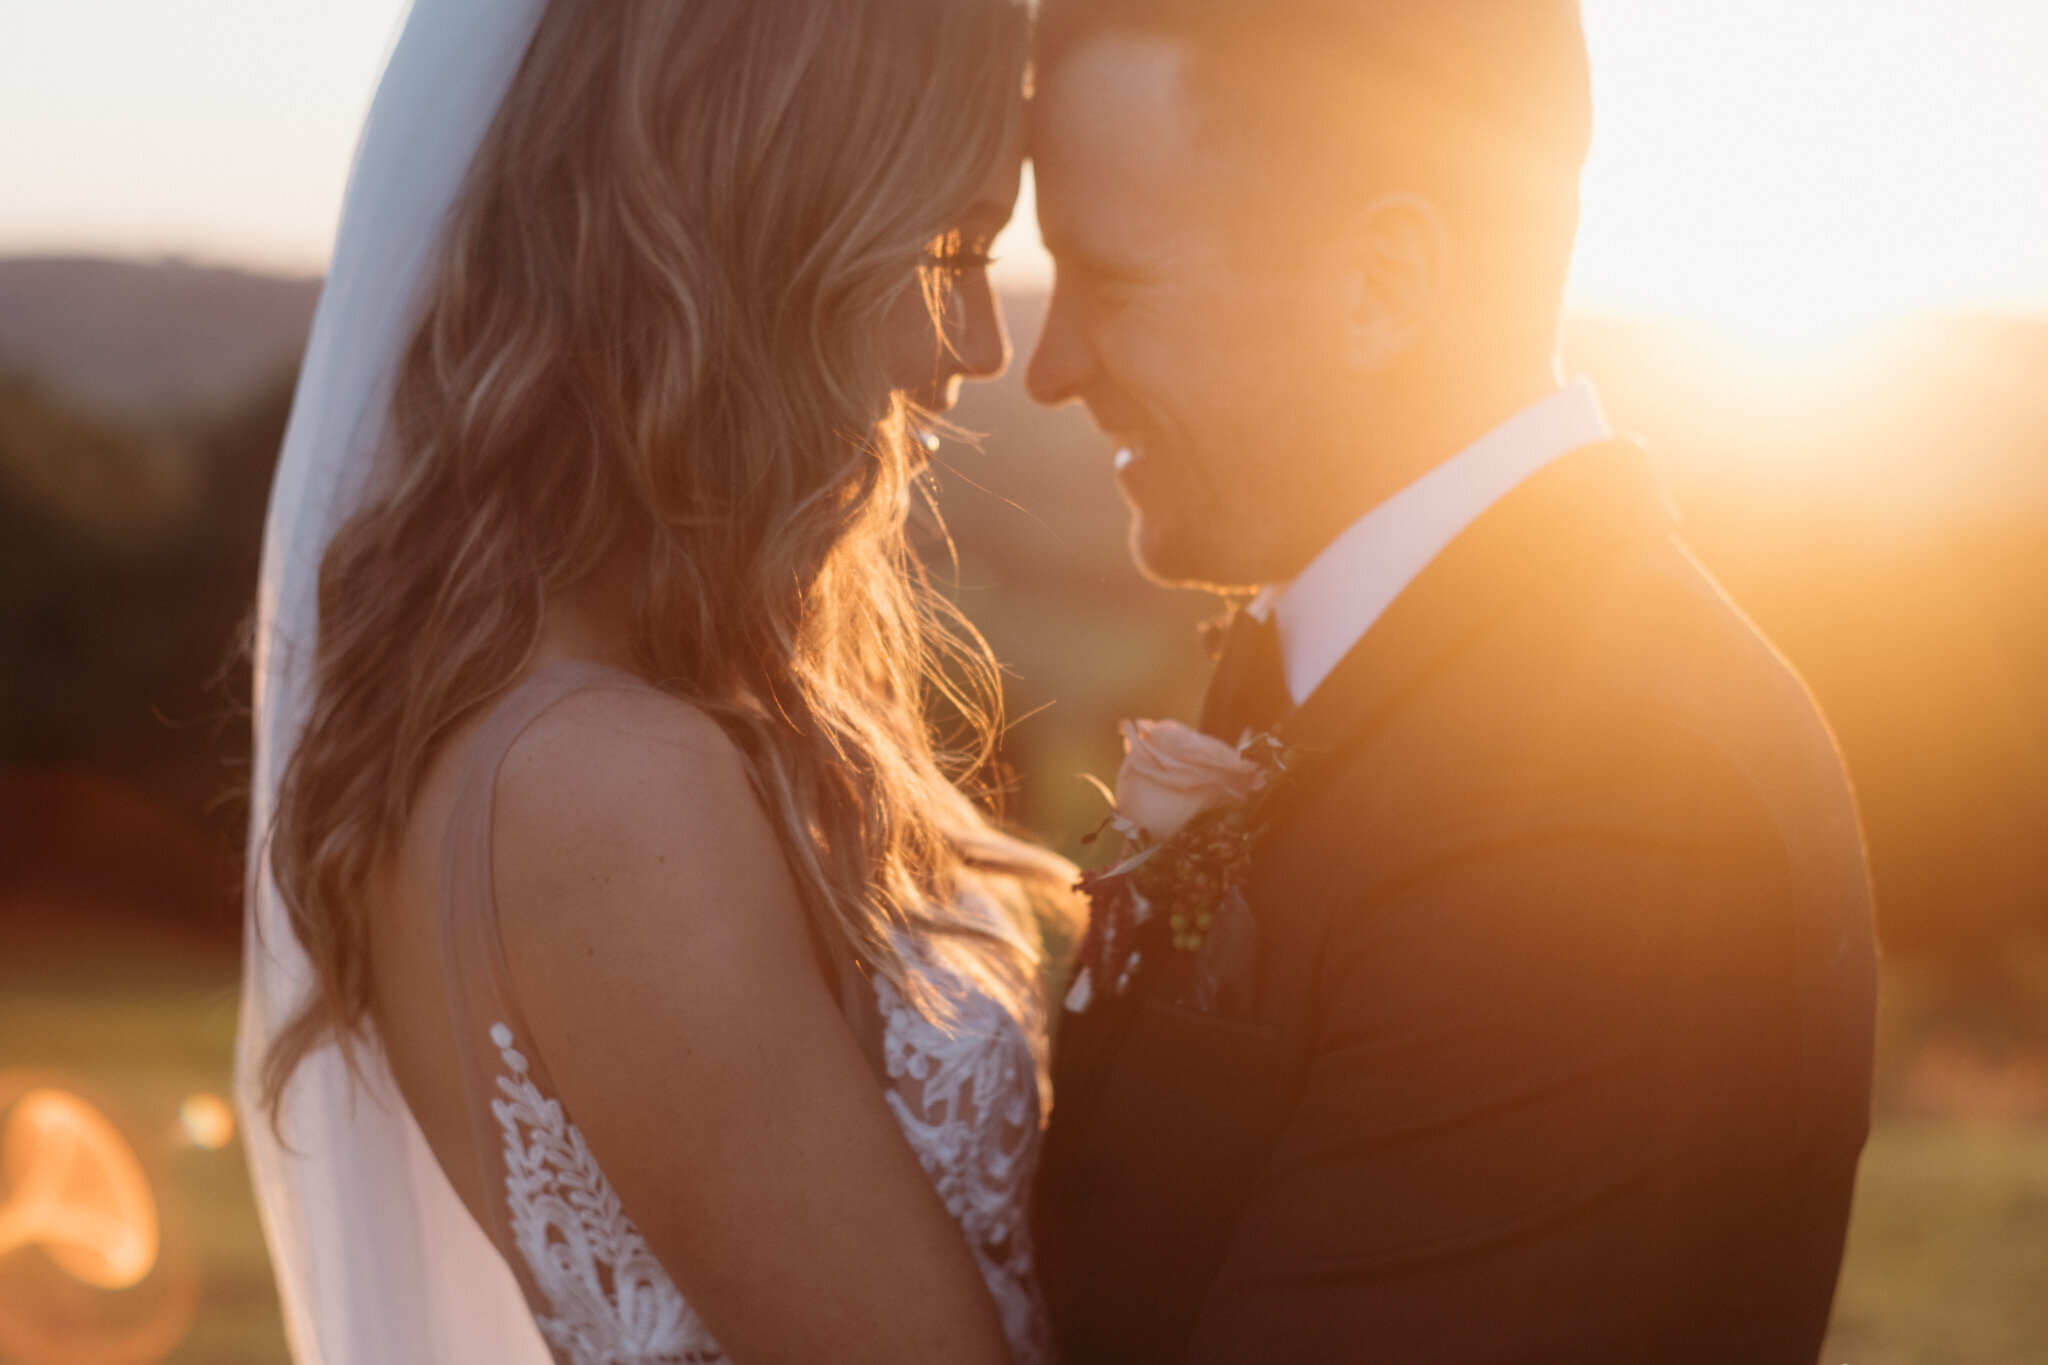 ultimate sunset portrait - Trent and Jessie wedding photography and videography 